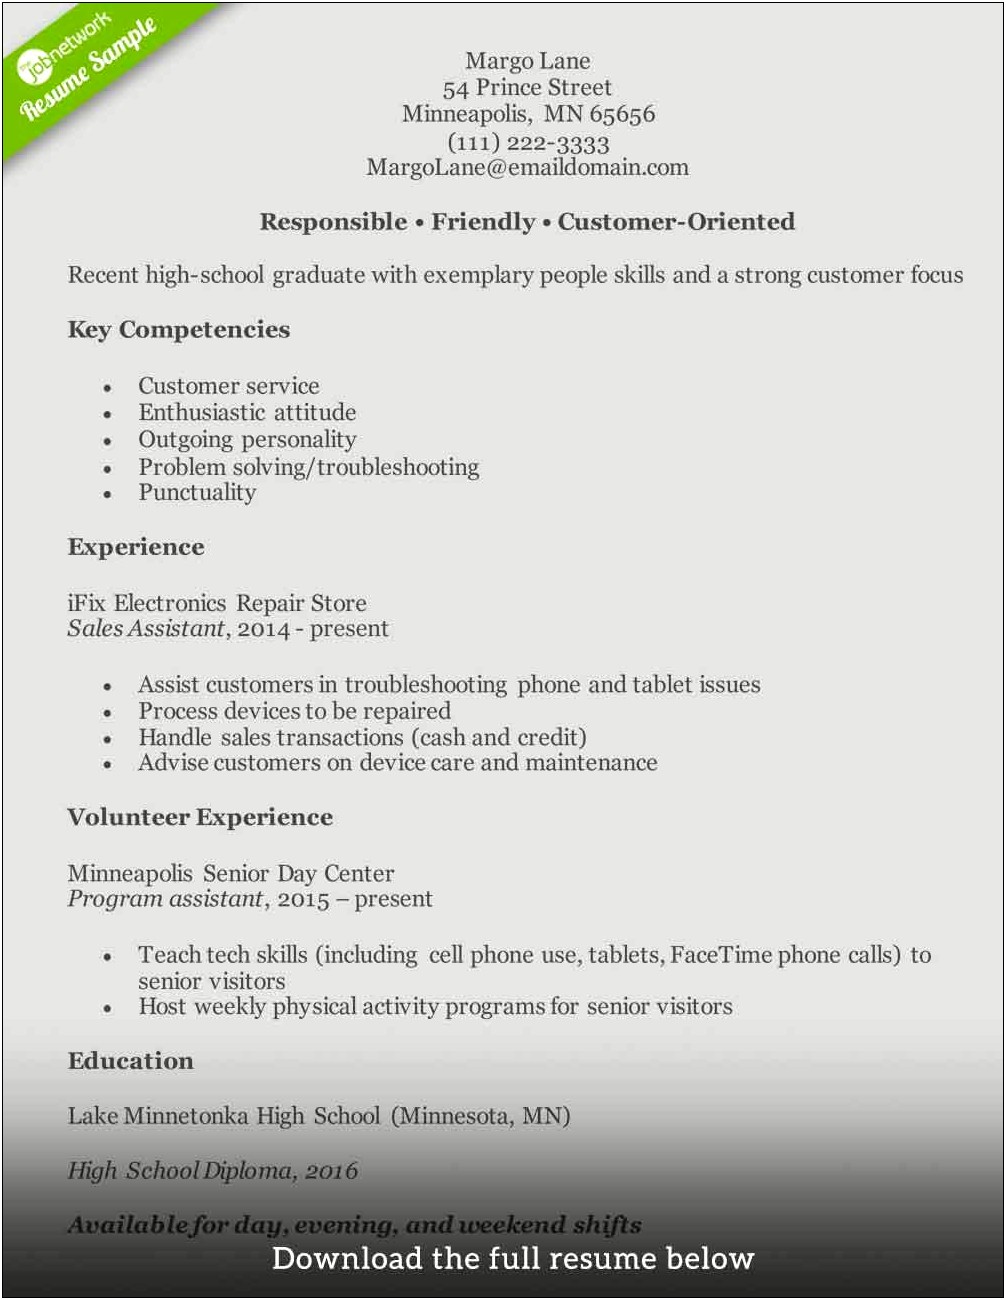 Customer Service Skills And Abilities For Resume